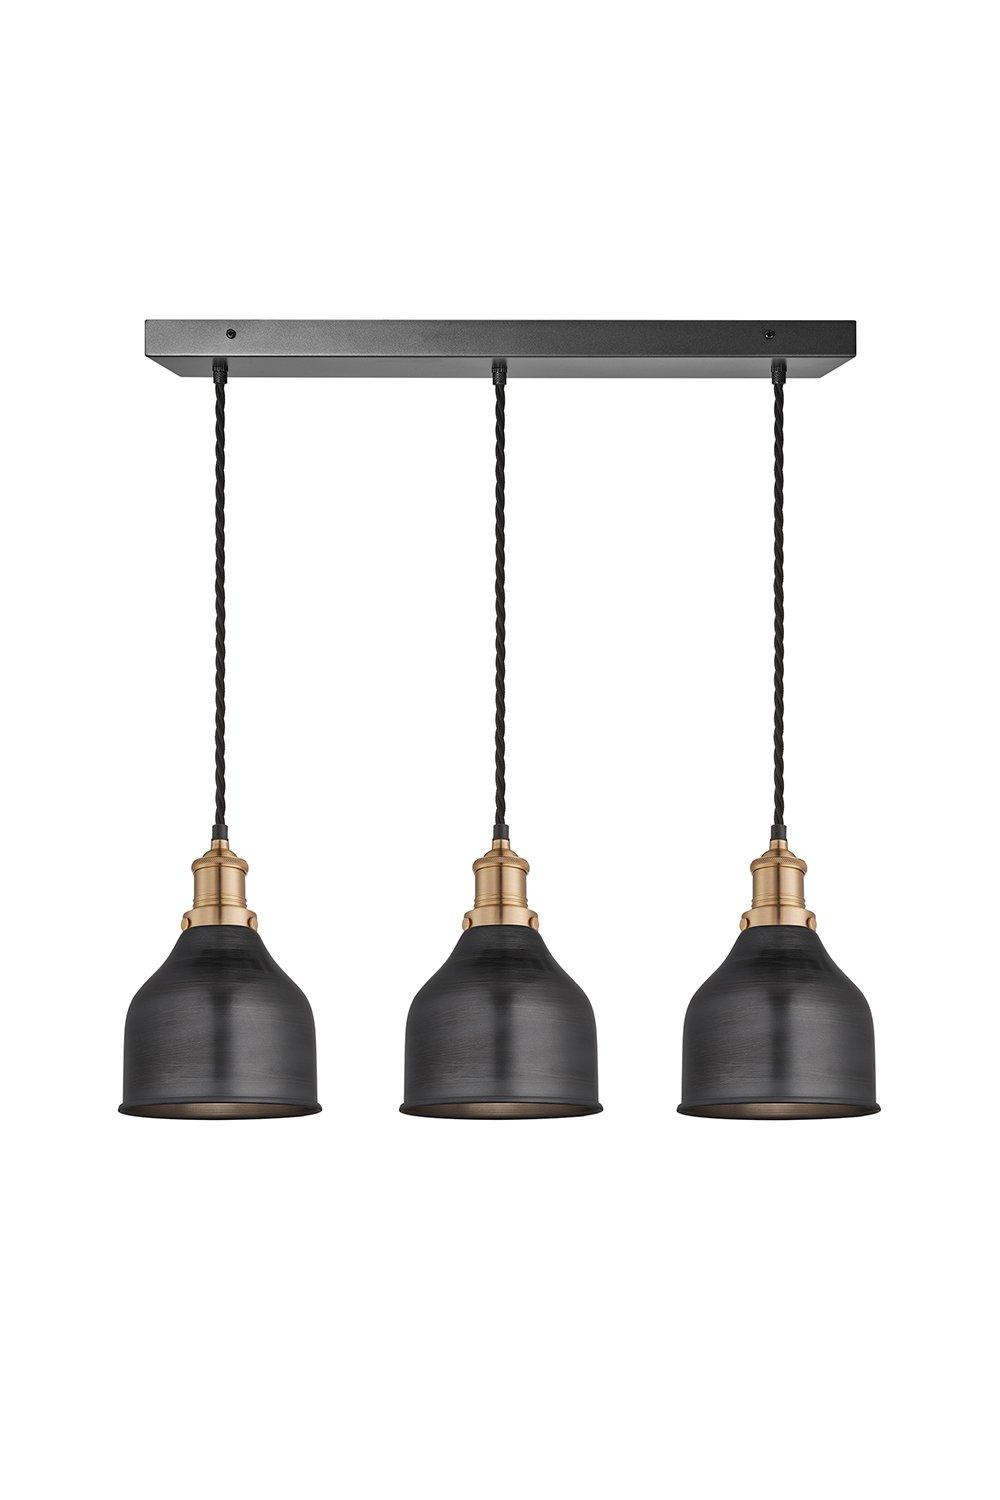 Brooklyn Cone 3 Wire Cluster Lights, 7 inch, Pewter, Brass holder